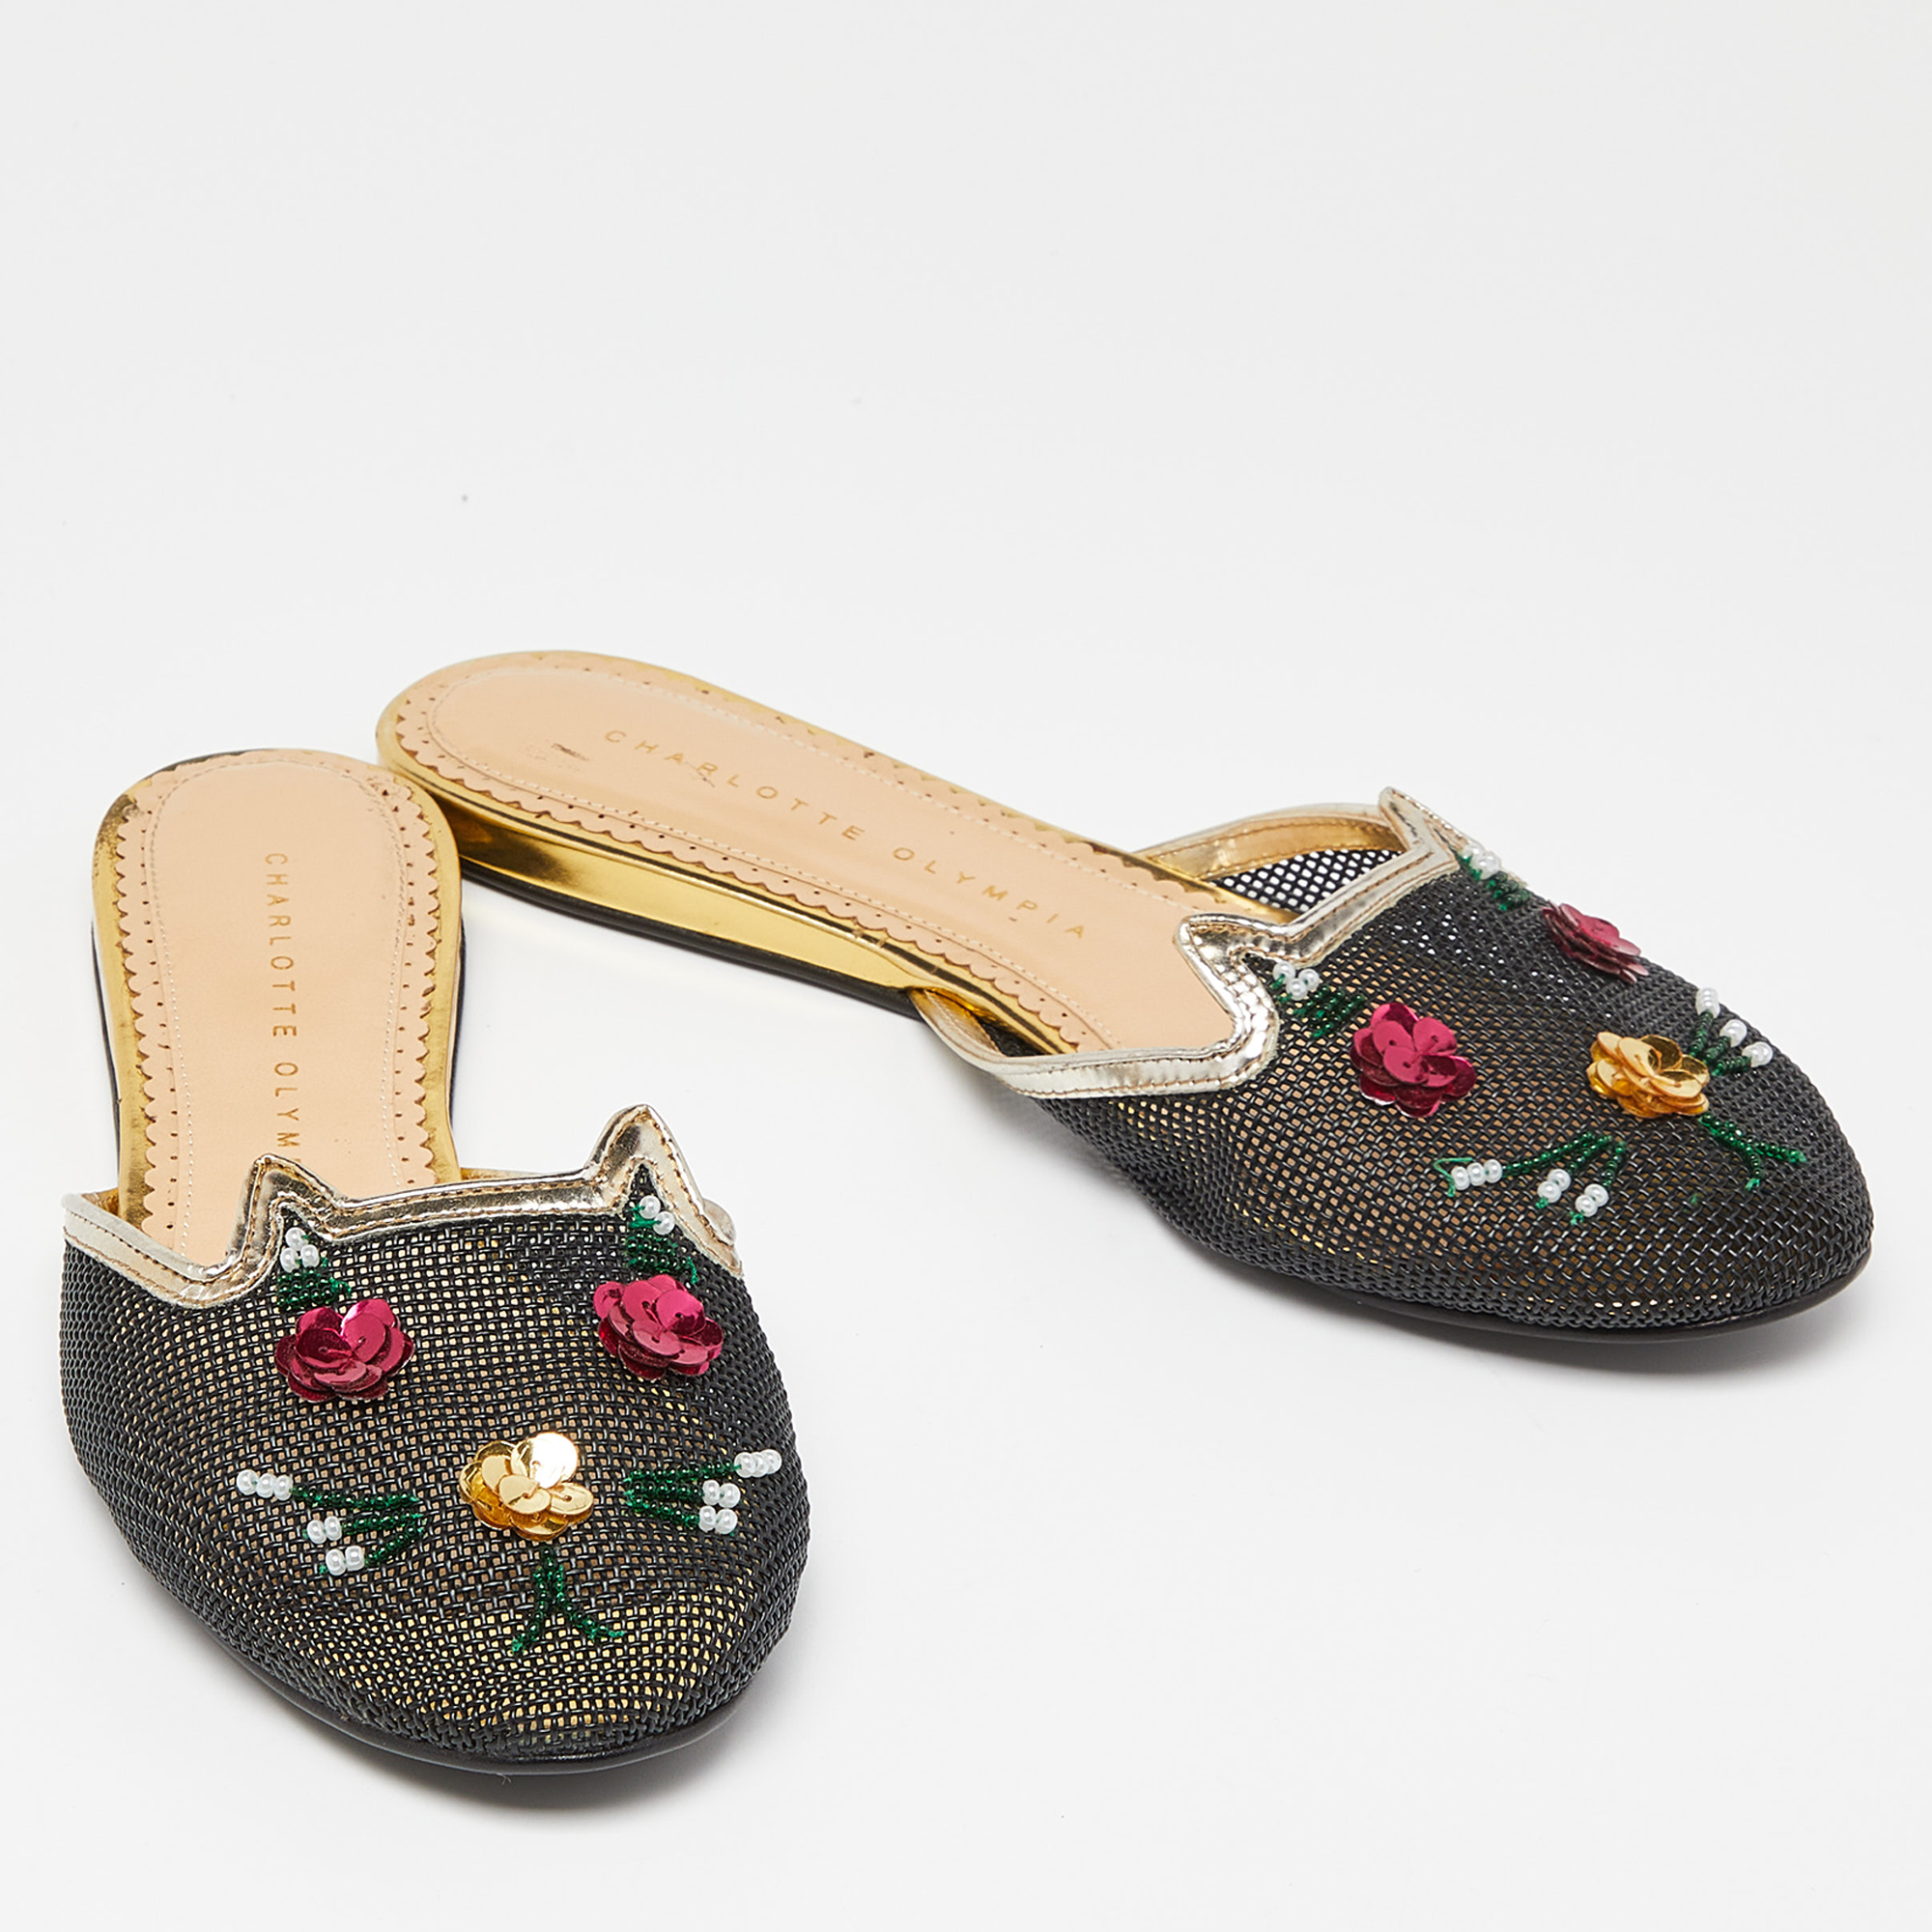 Charlotte Olympia Black/Gold Mesh And Patent Leather Kitsch Kitty Sequin Flat Slides Size 37